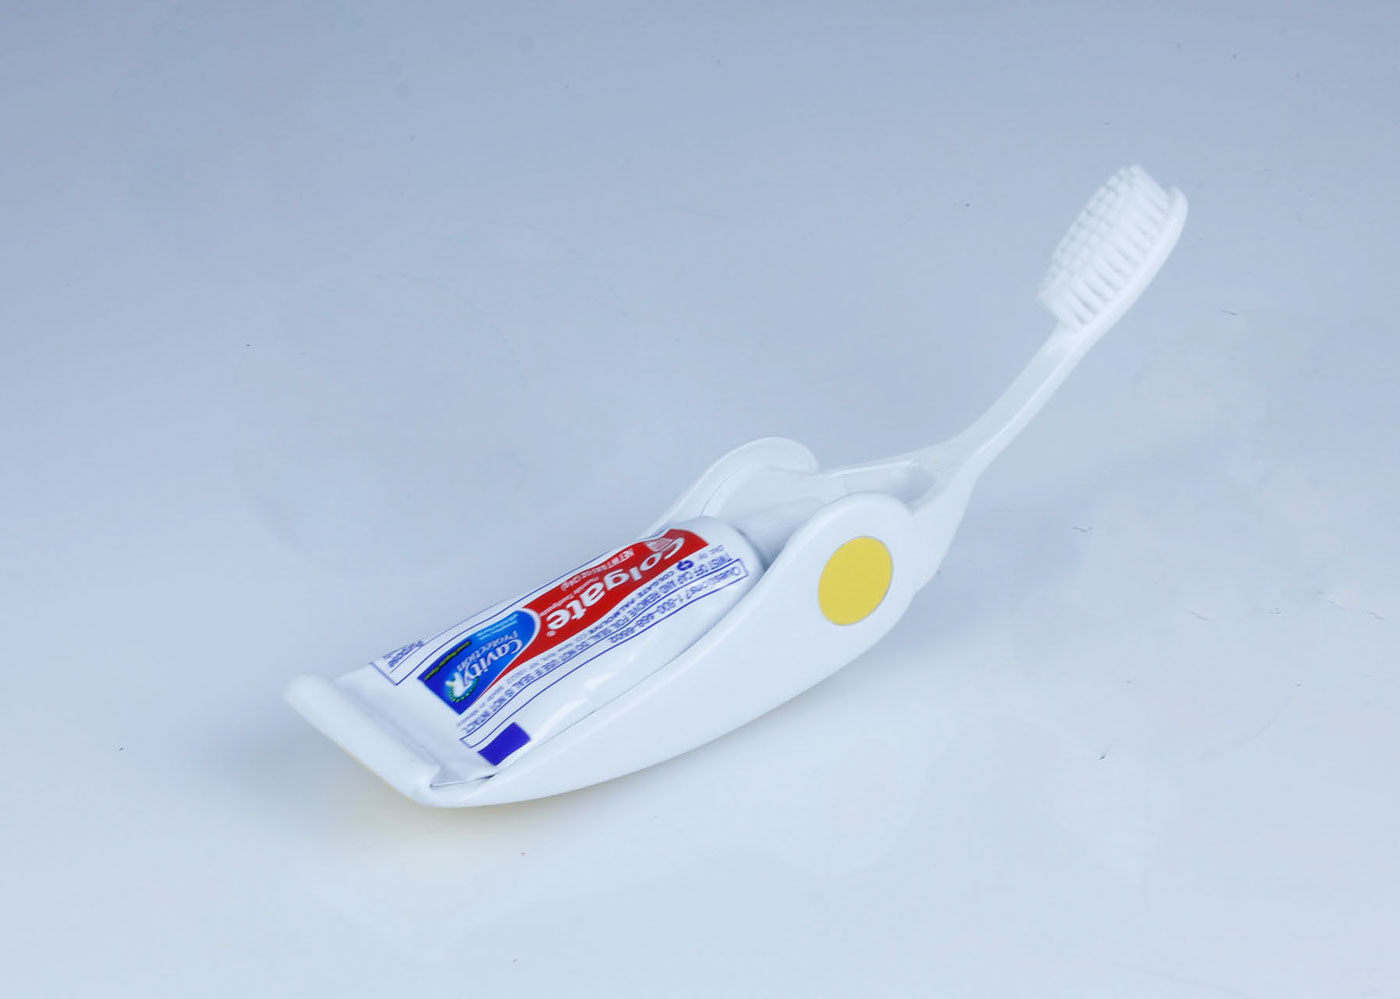 toothbrush design toothpaste holder product Travel easy 1+1 creative